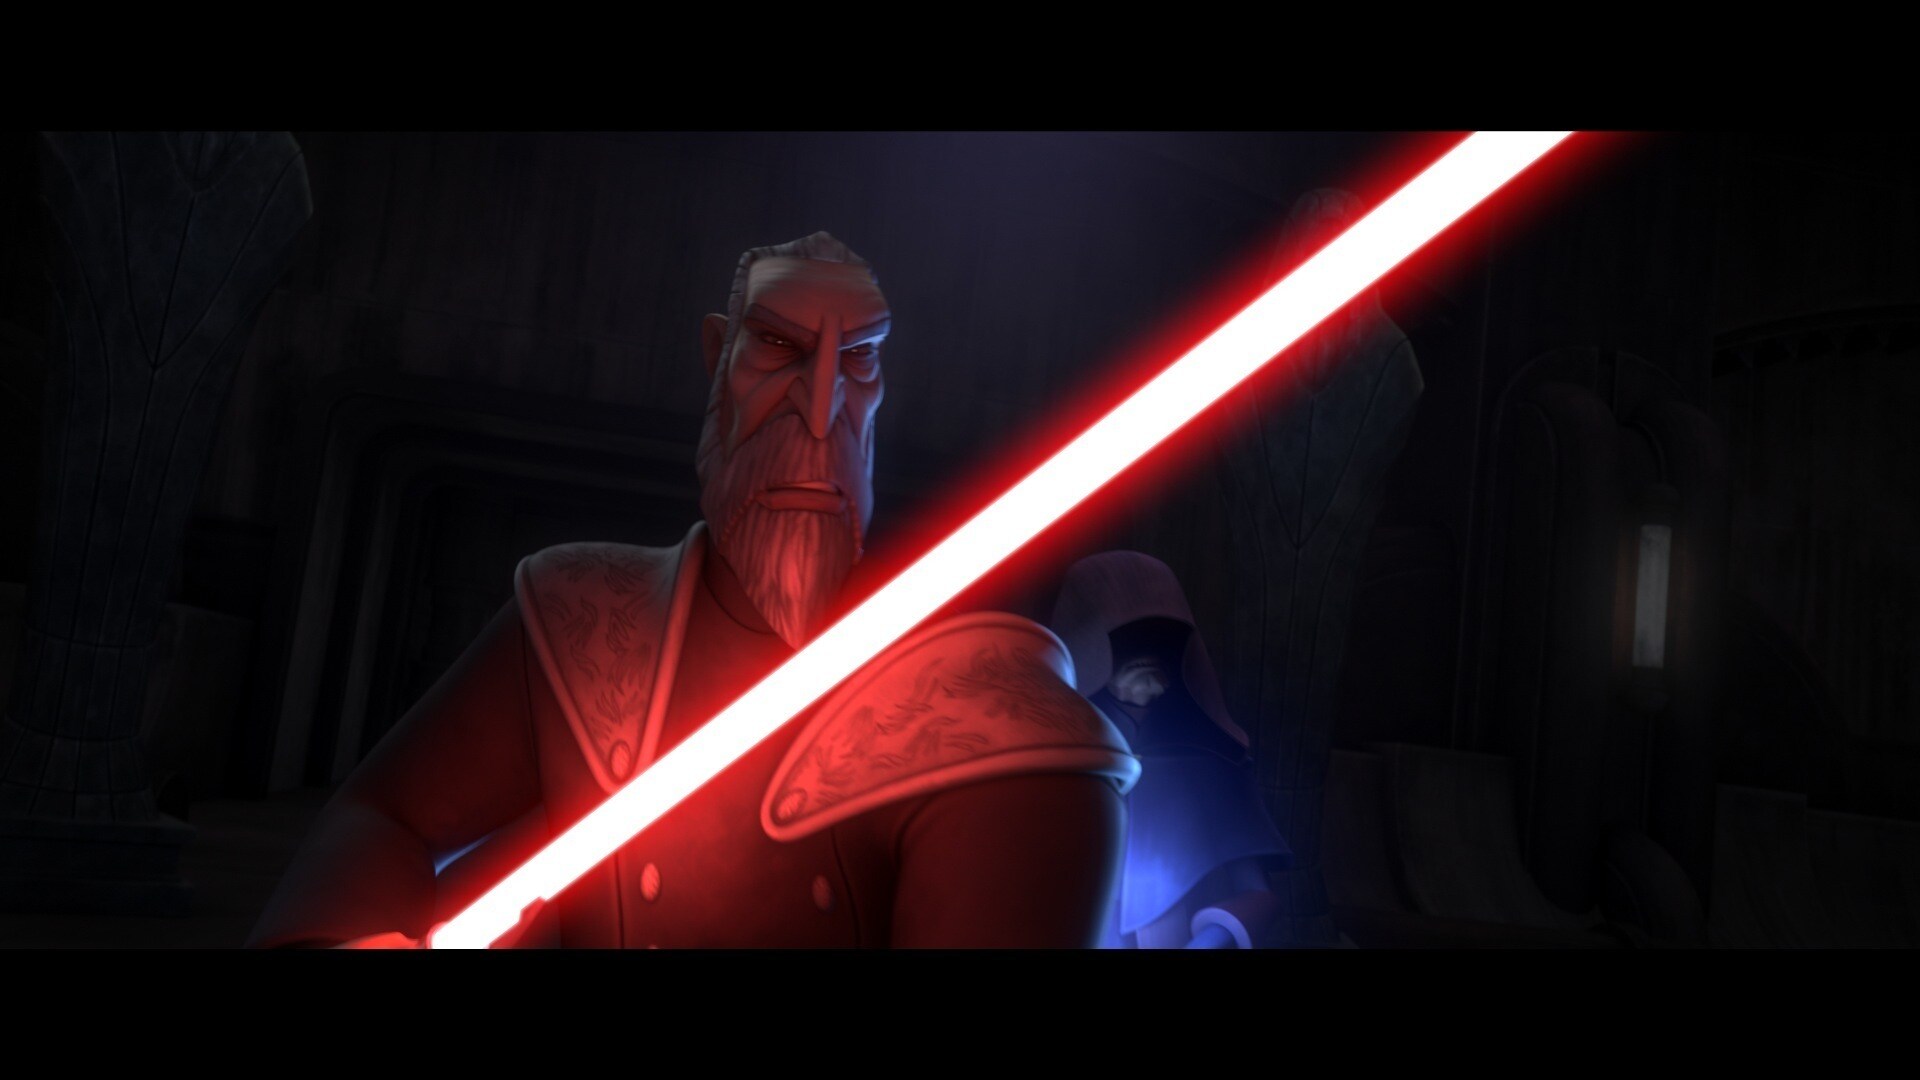 Dooku's sparring uniform debuts in this episode, and not only afforded the Sith Lord a new look, ...